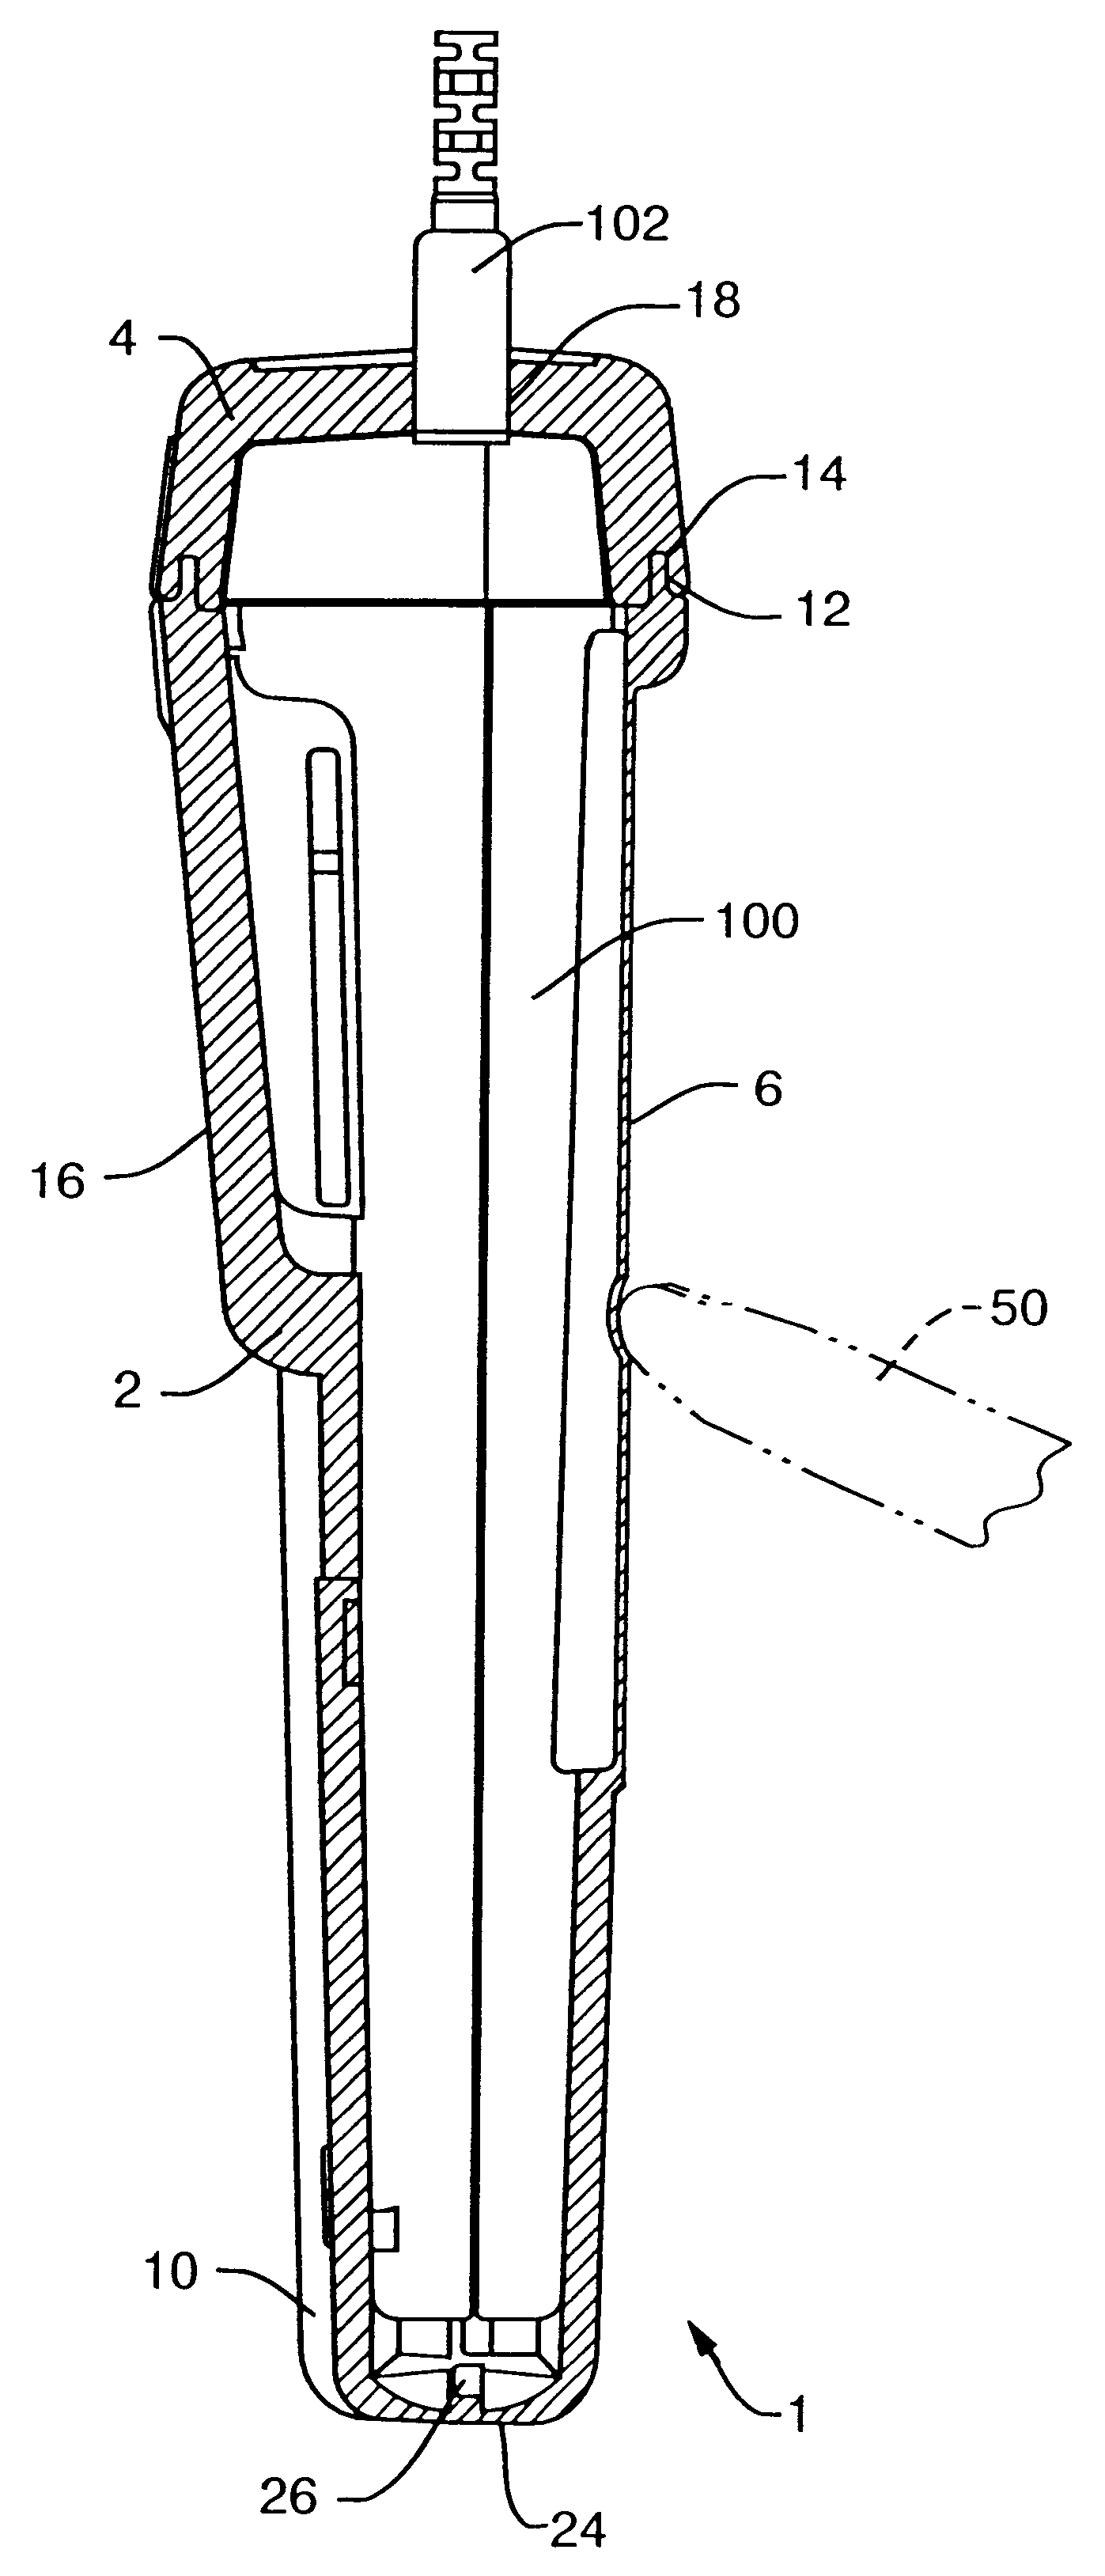 Watertight protective device for holding a measuring or display device